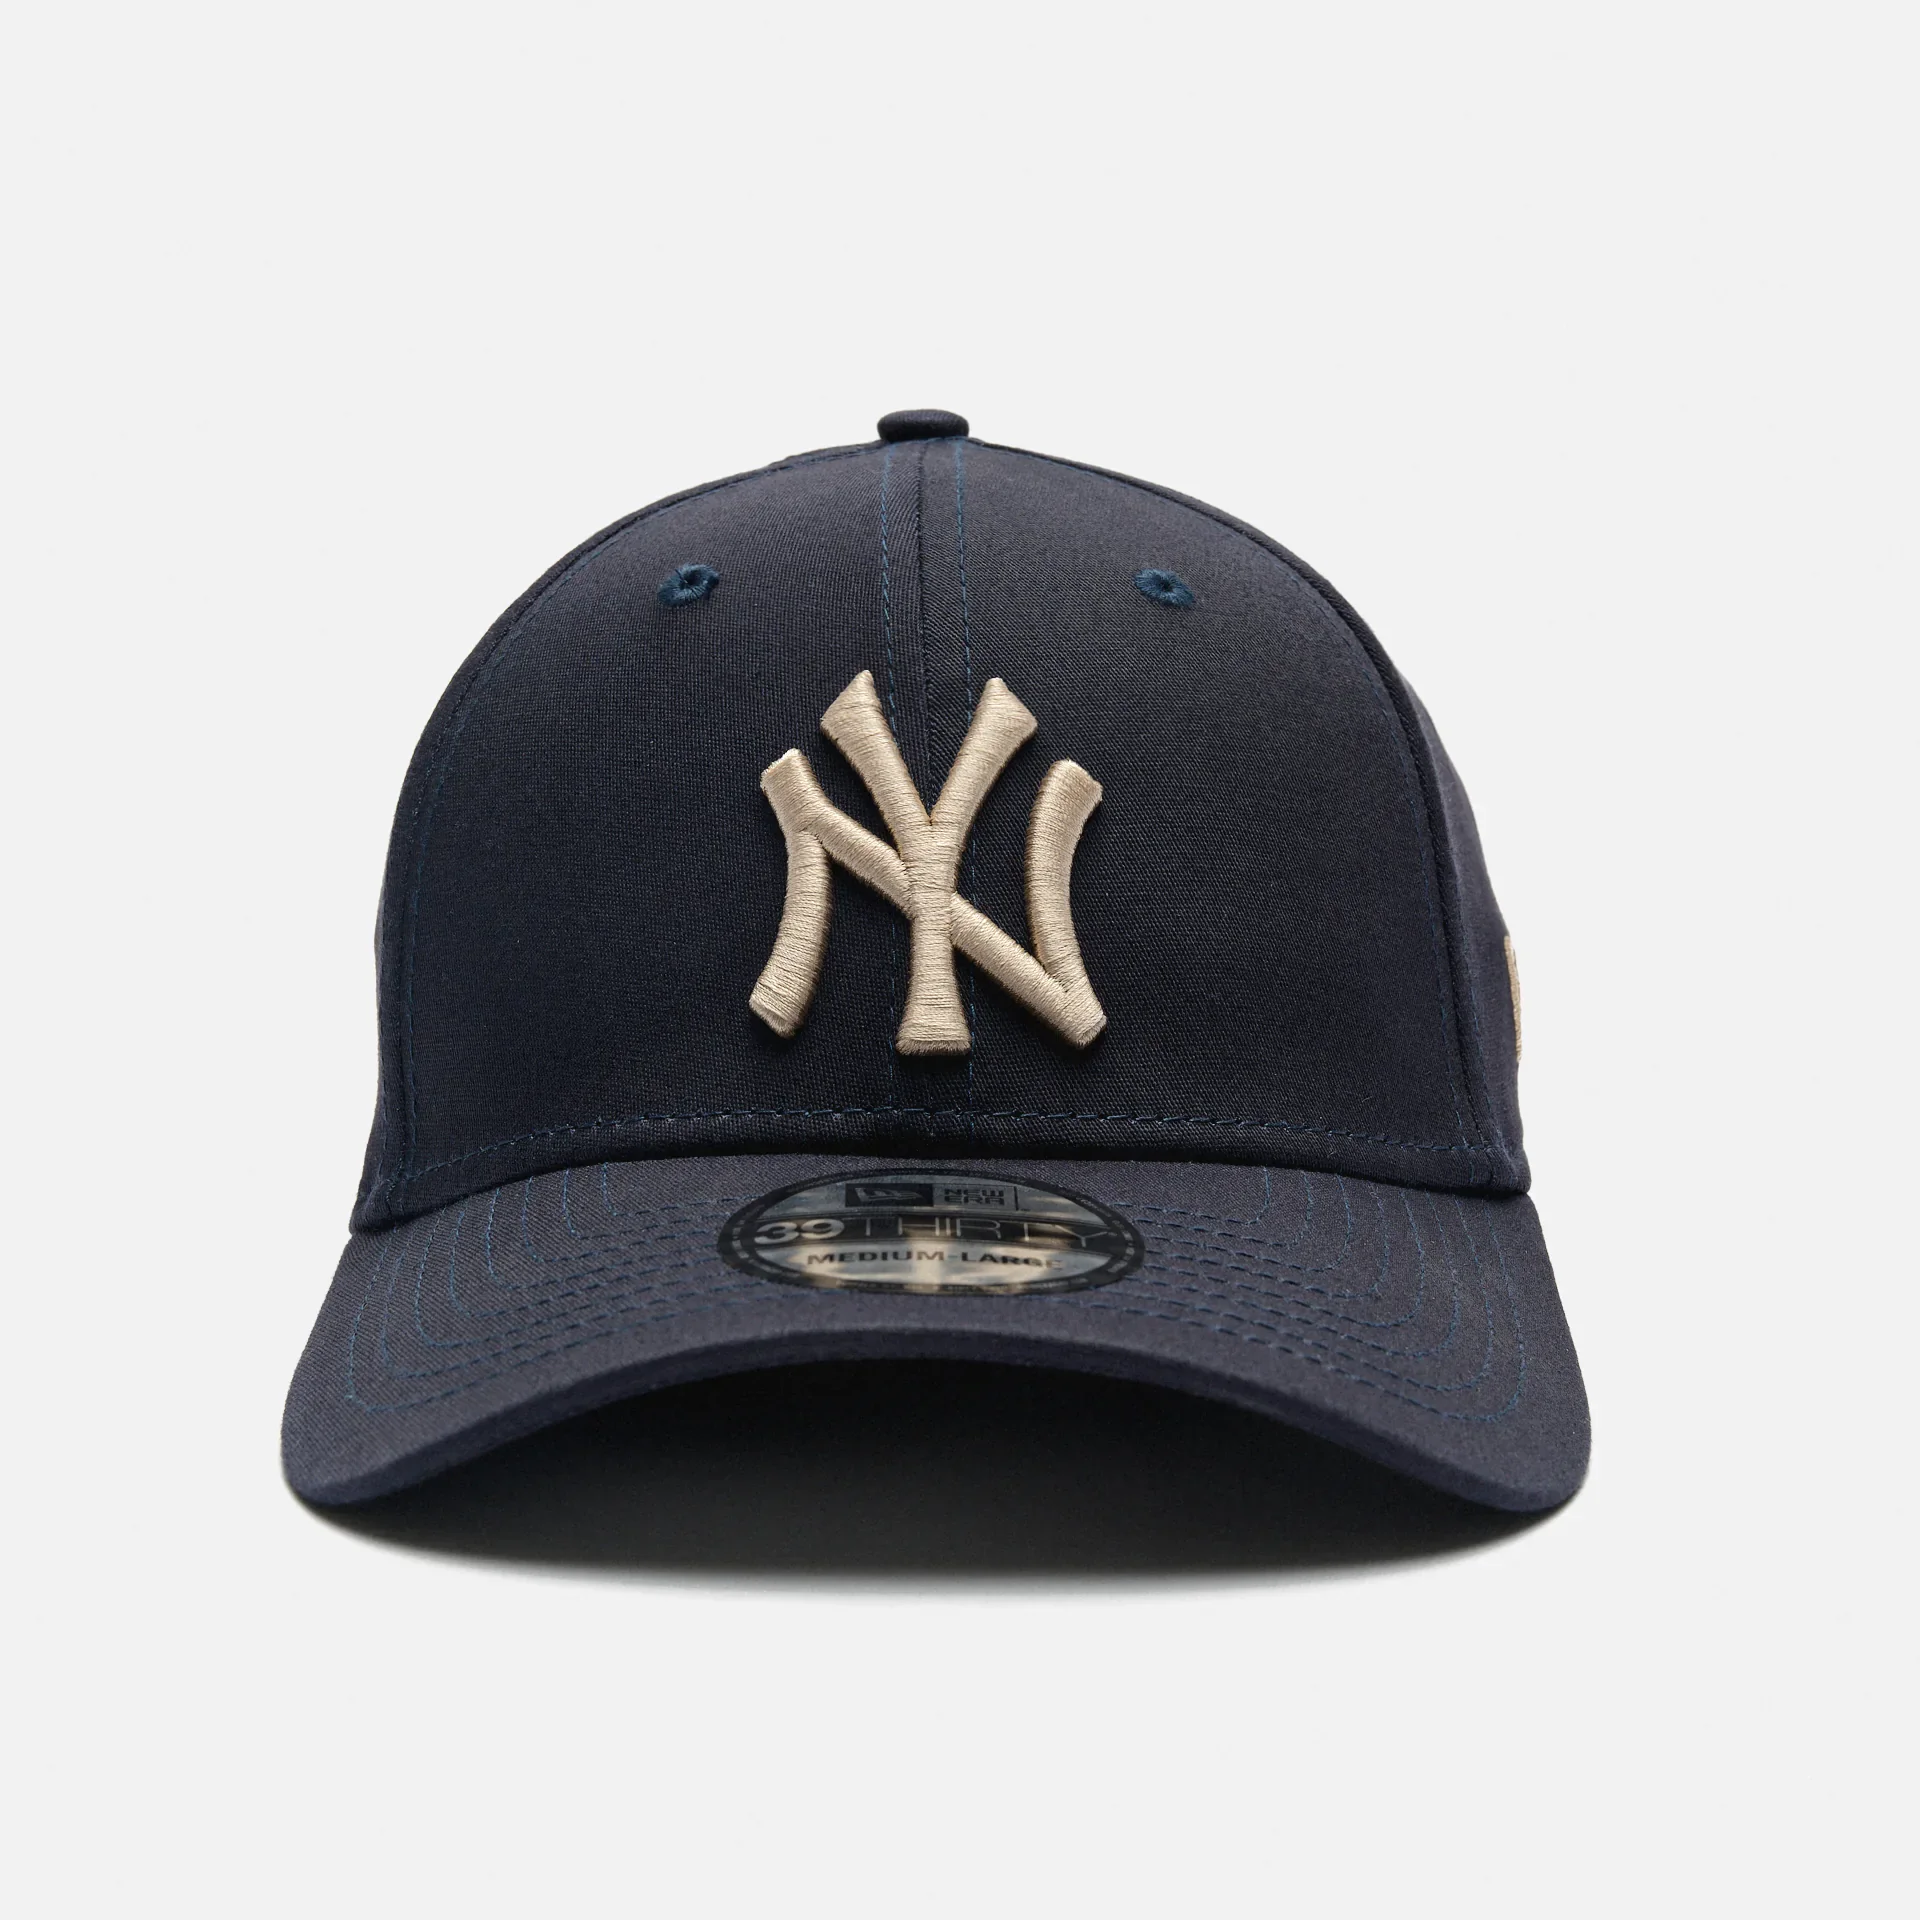 New Era MLB NY Yankees League Essential 39thirty Stretch Fit Cap Navy/Stone